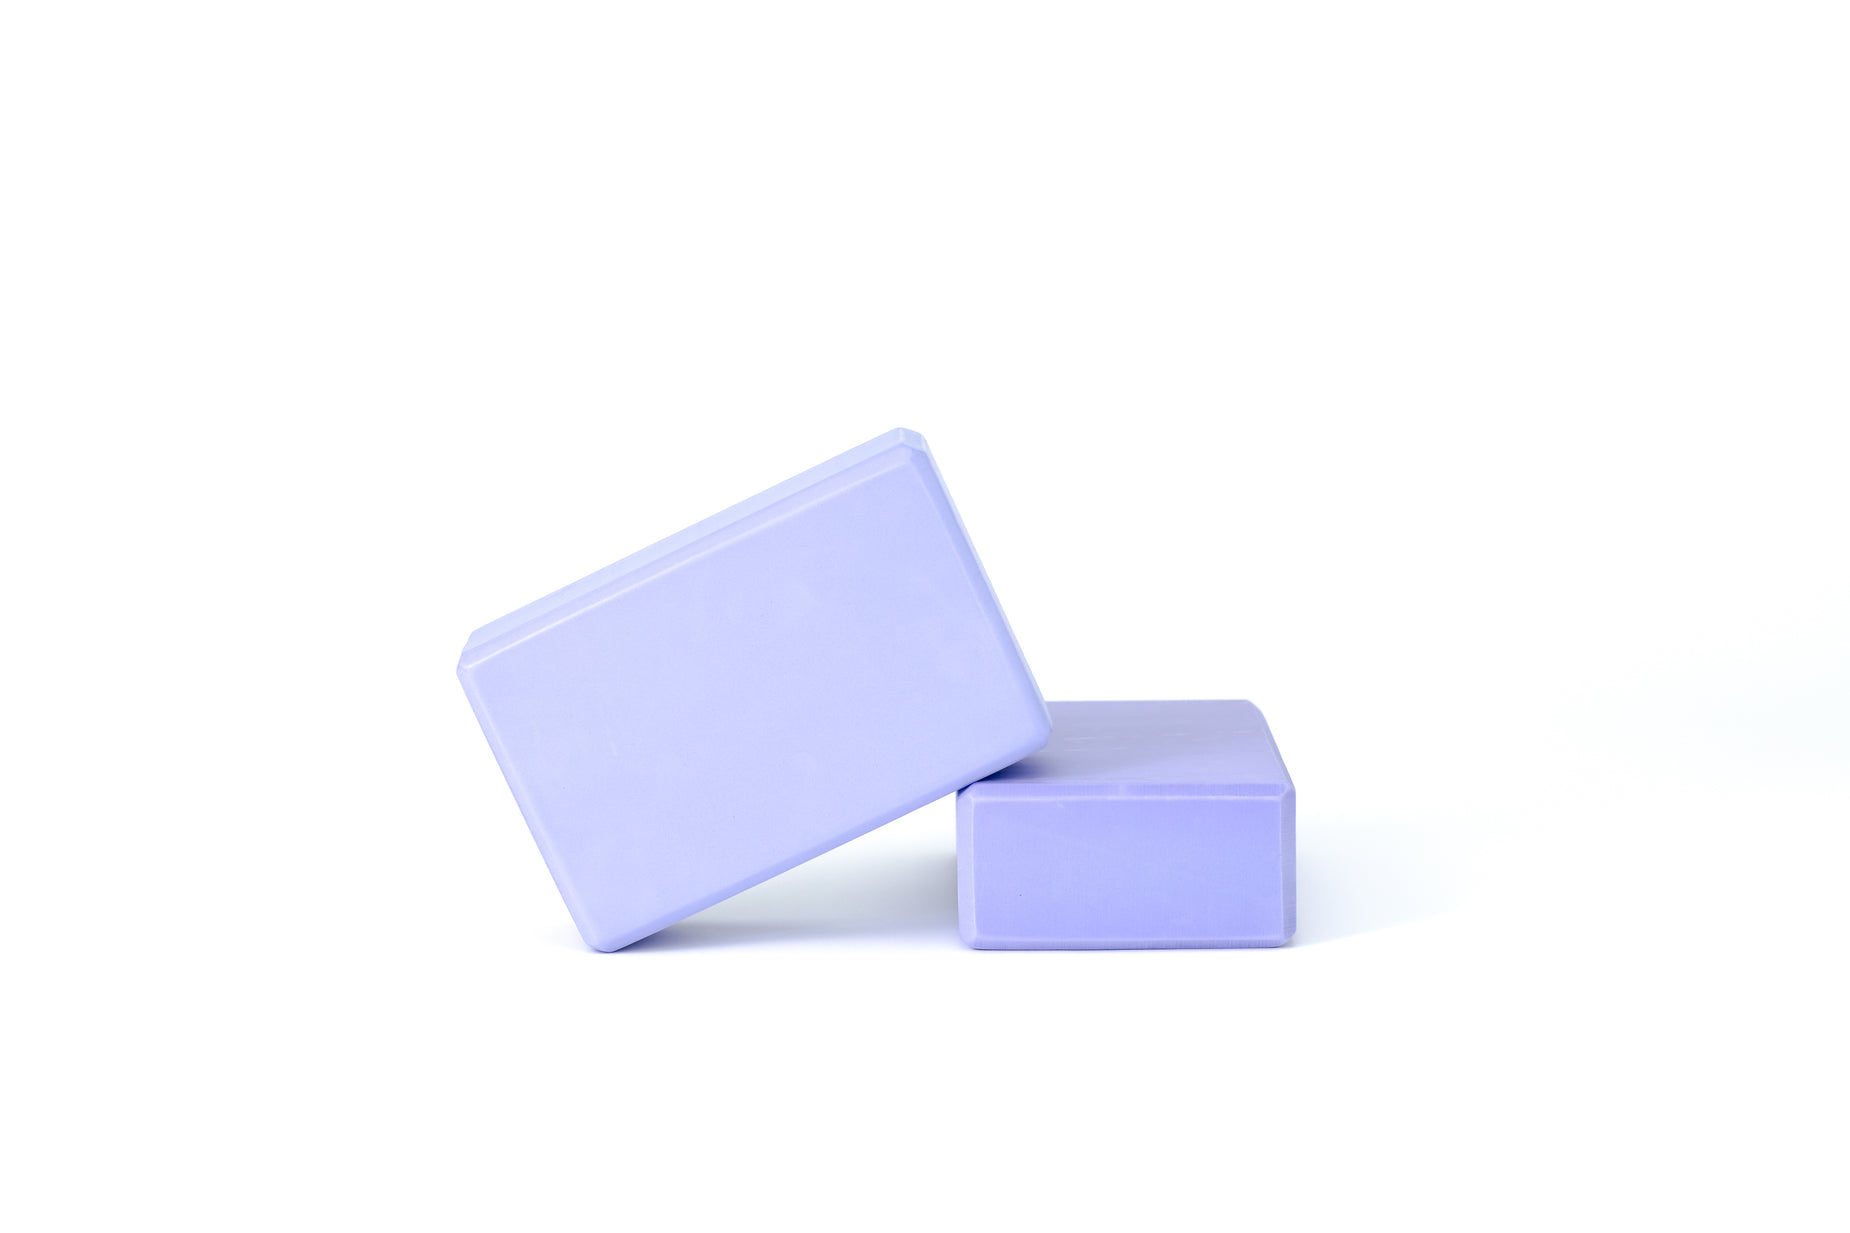 a small purple block sitting next to a smaller white block